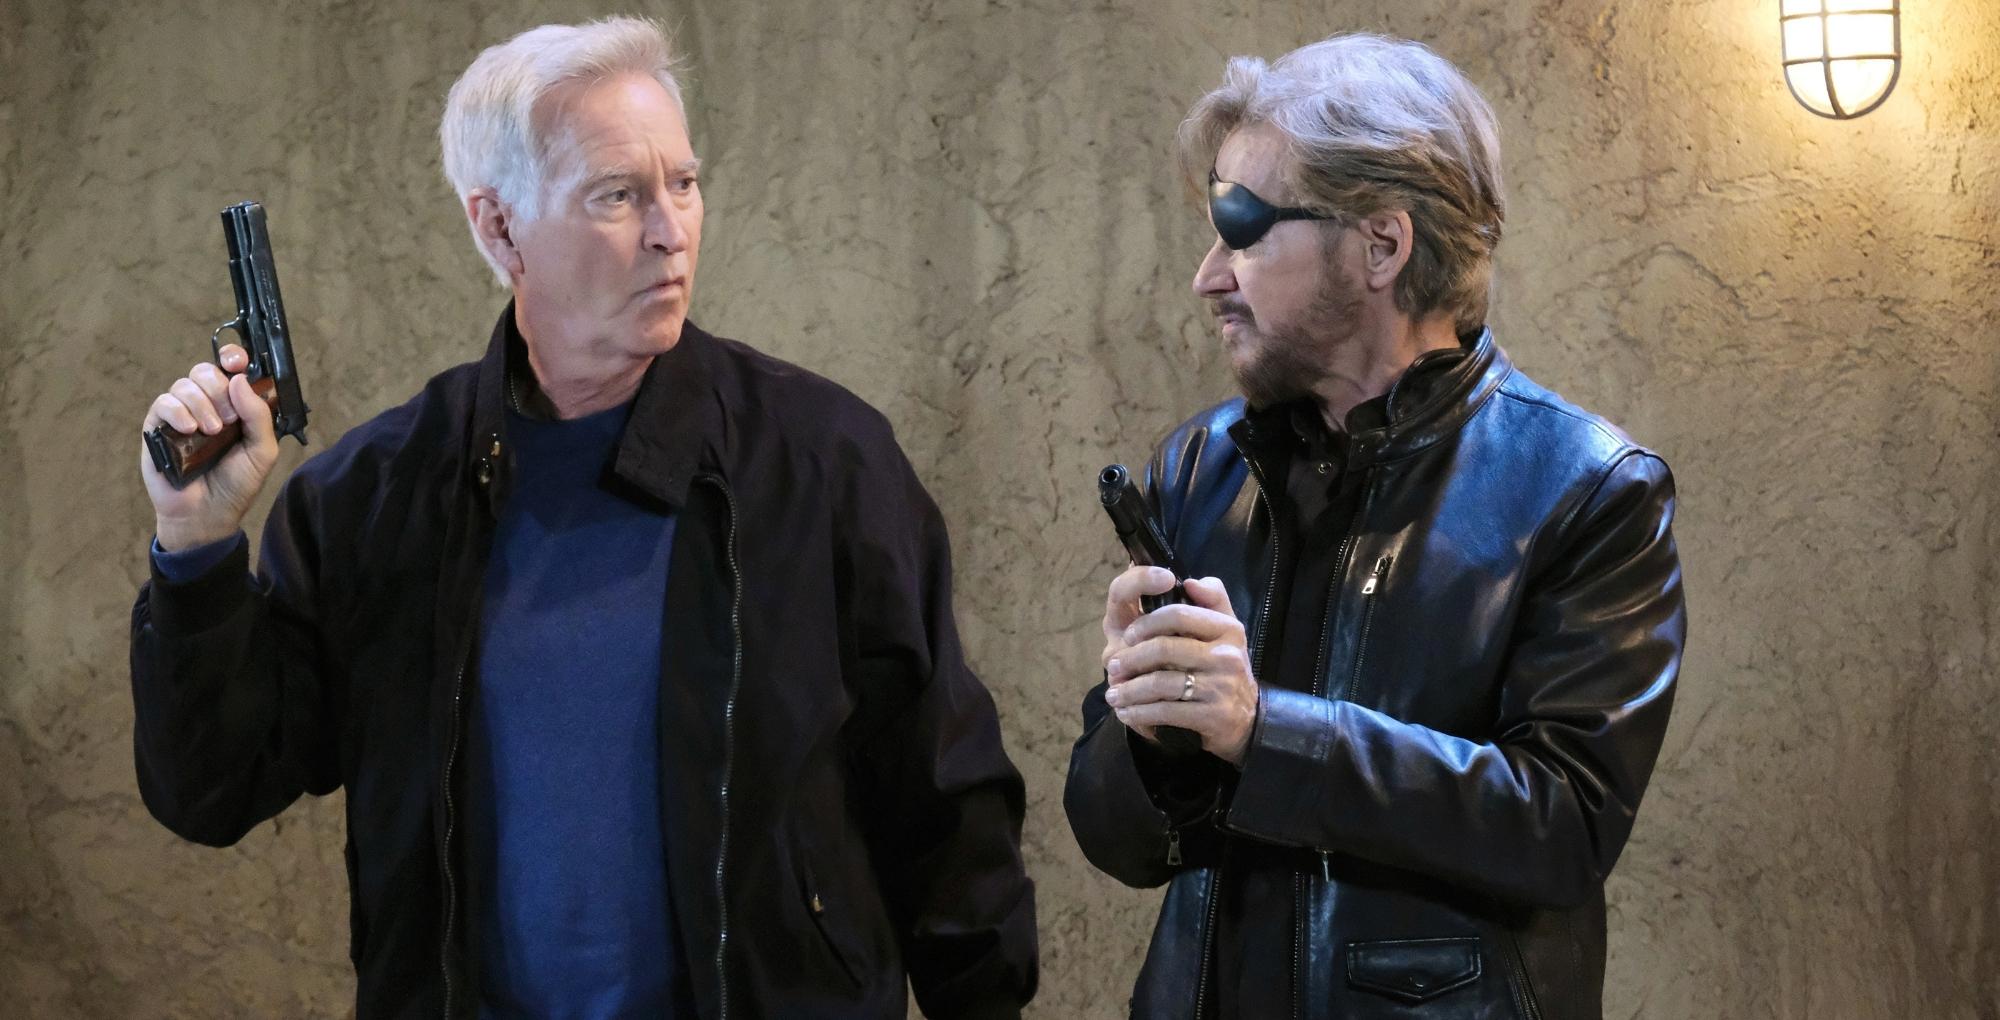 Days of our Lives Spoilers: Steve And John Close In On Megan